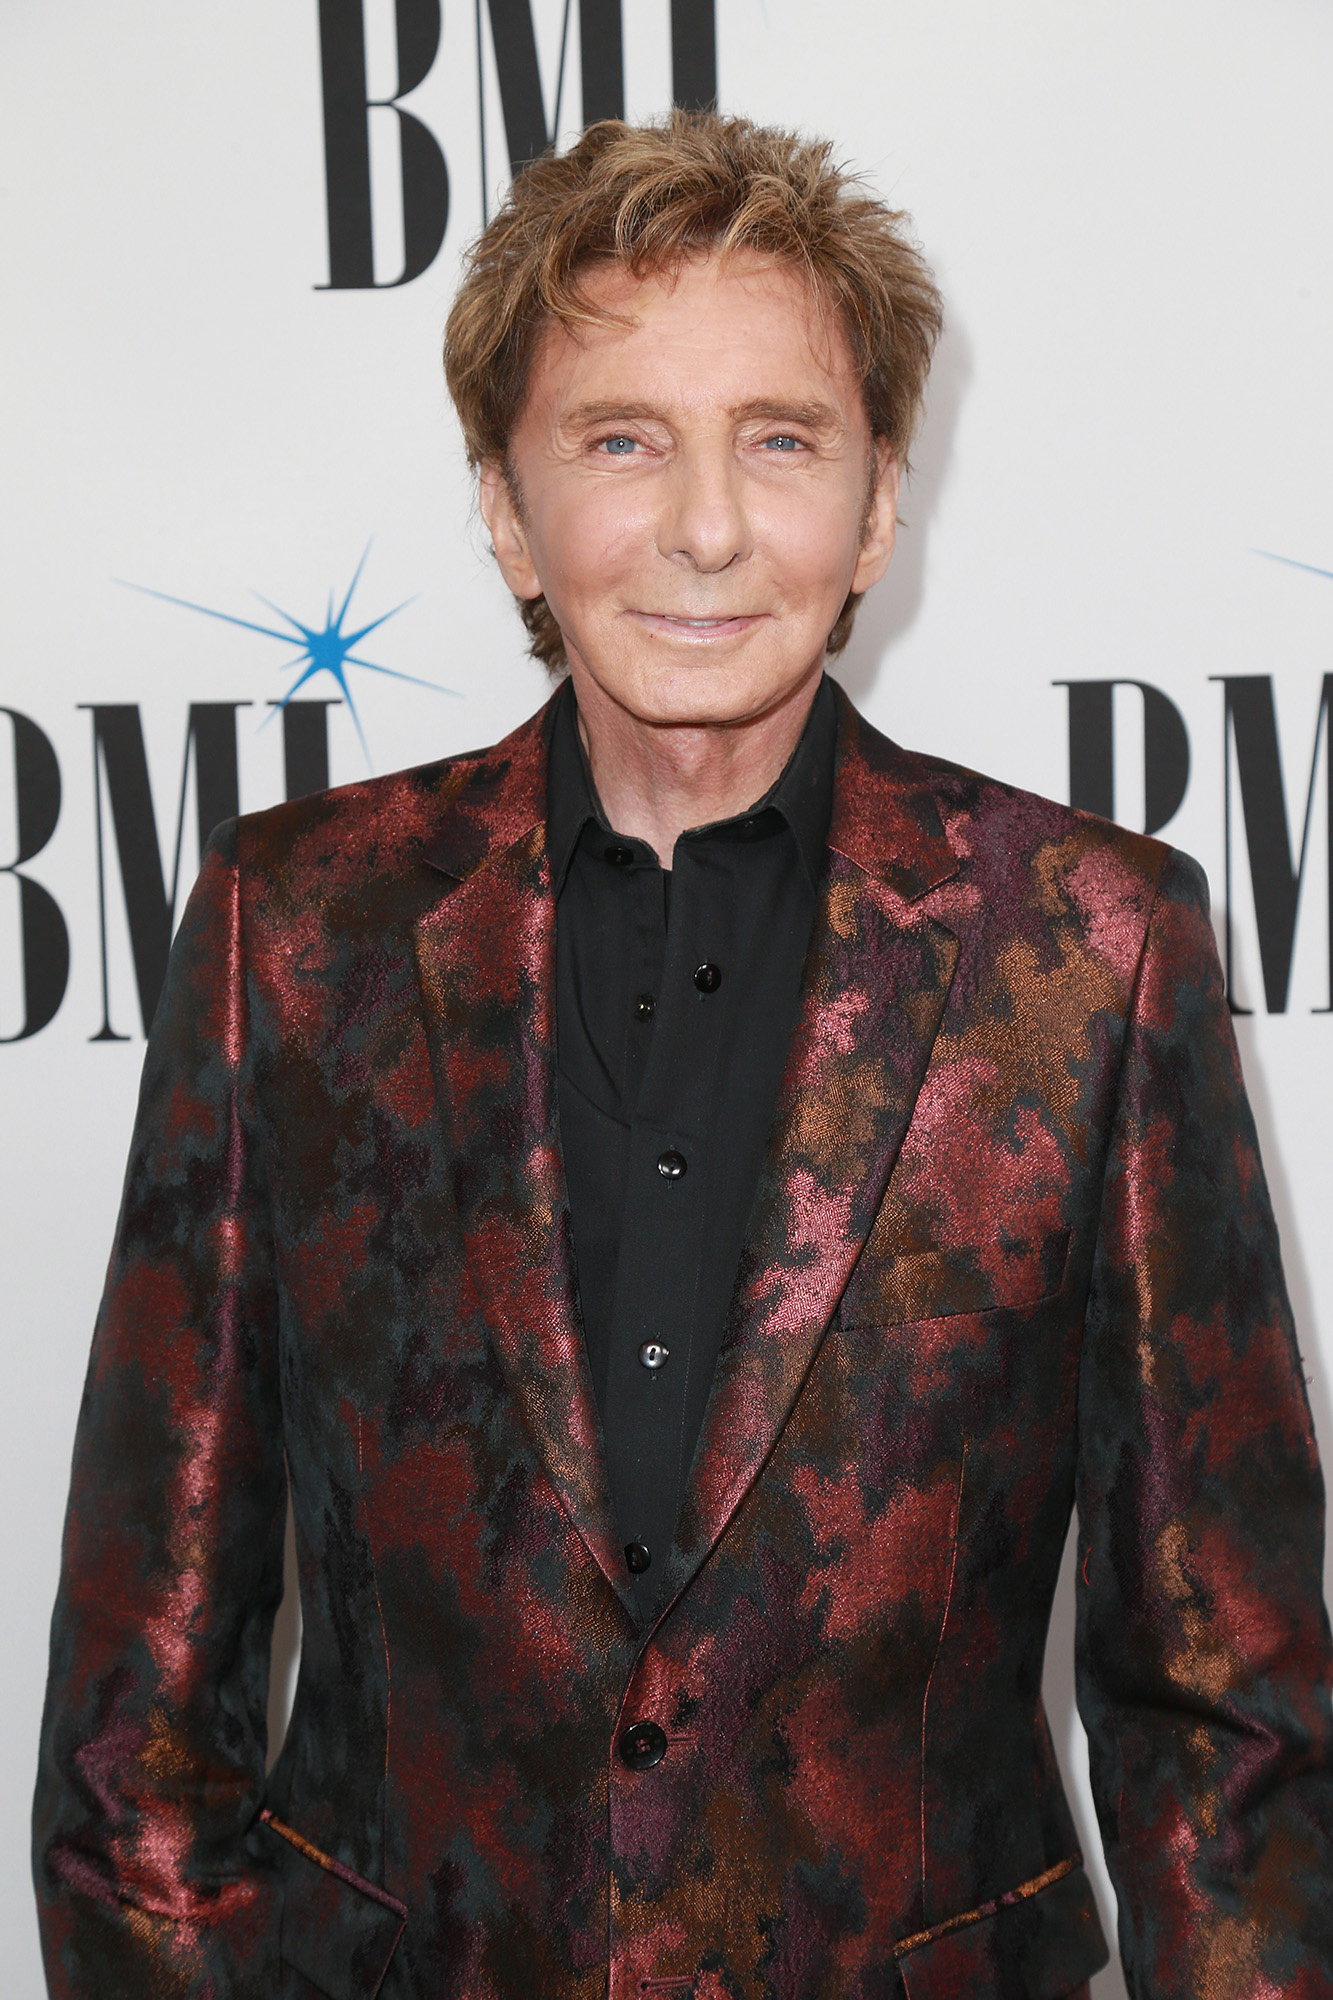 Free Manilow images, Downloadable wallpapers, Music icon, Visual inspiration, 1340x2000 HD Handy